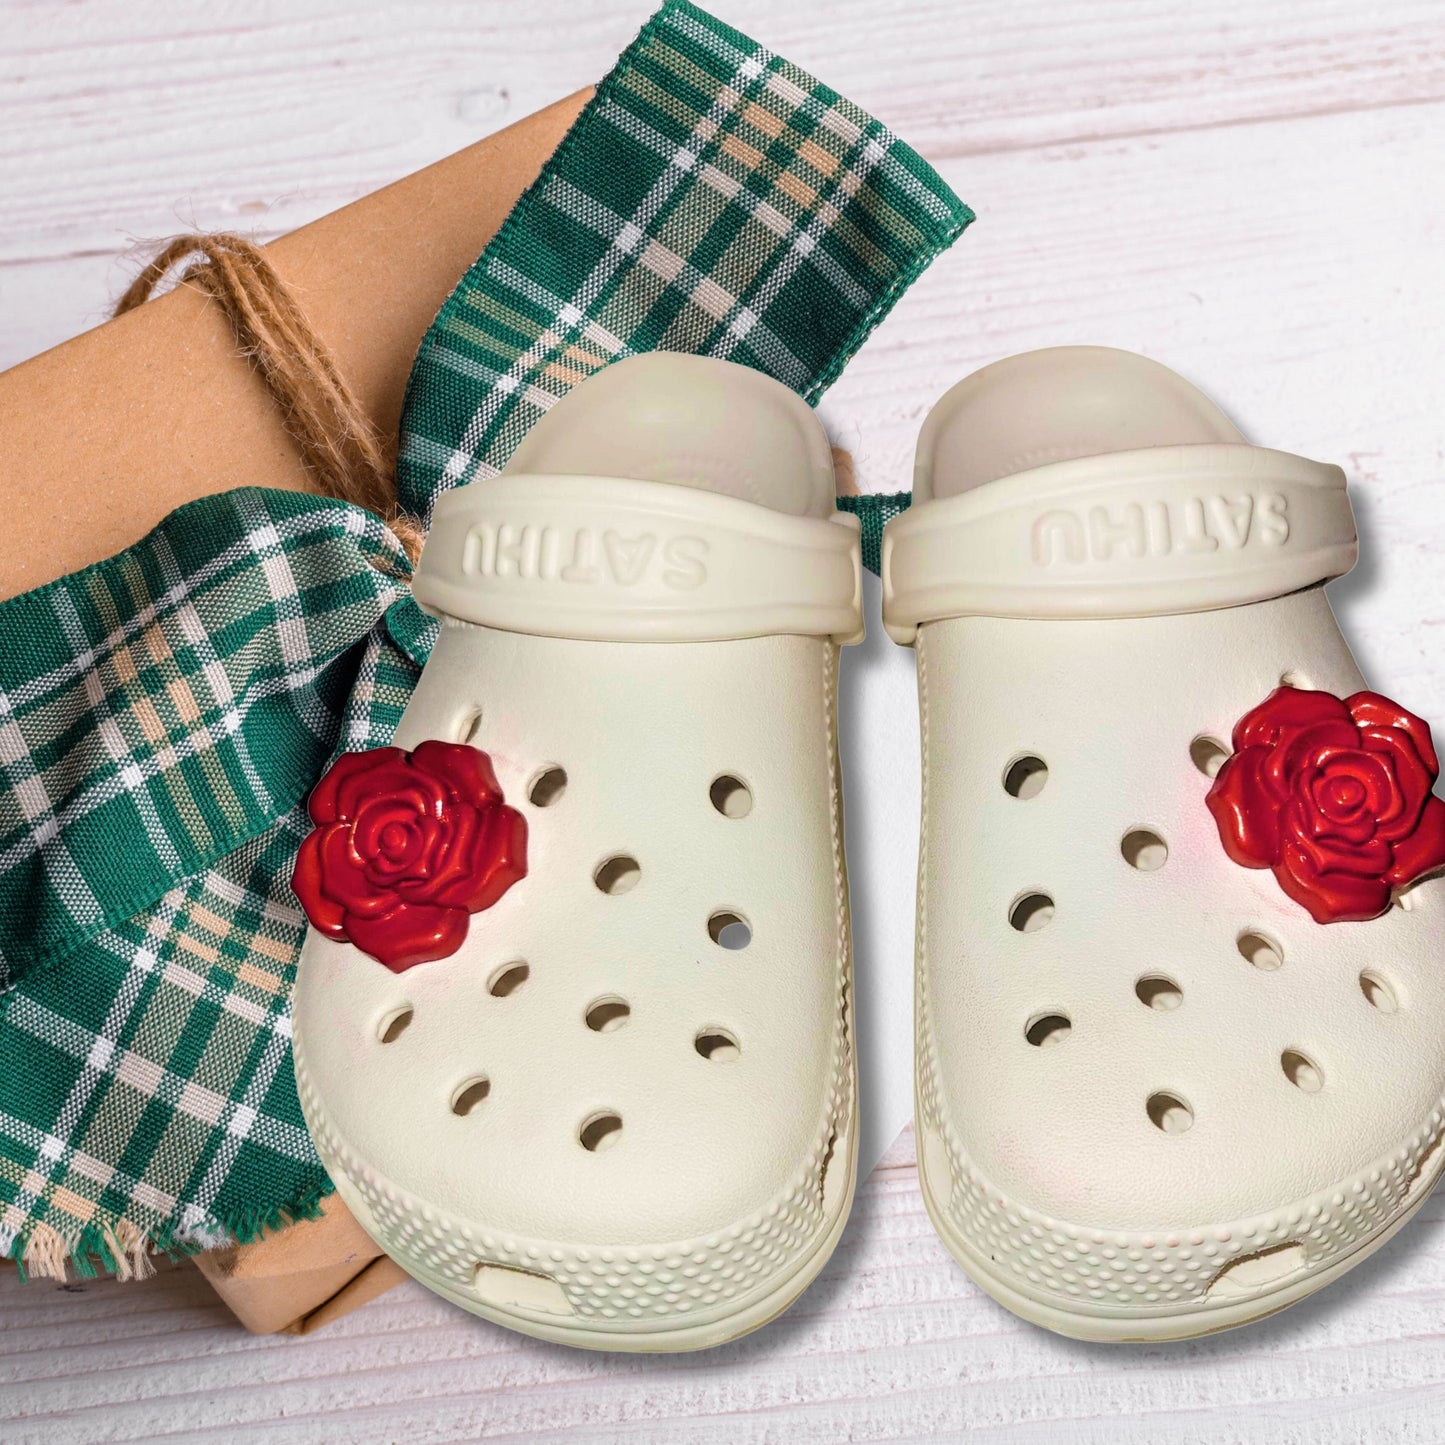 Crocs Charms Large Red Roses (2 Piece Set)